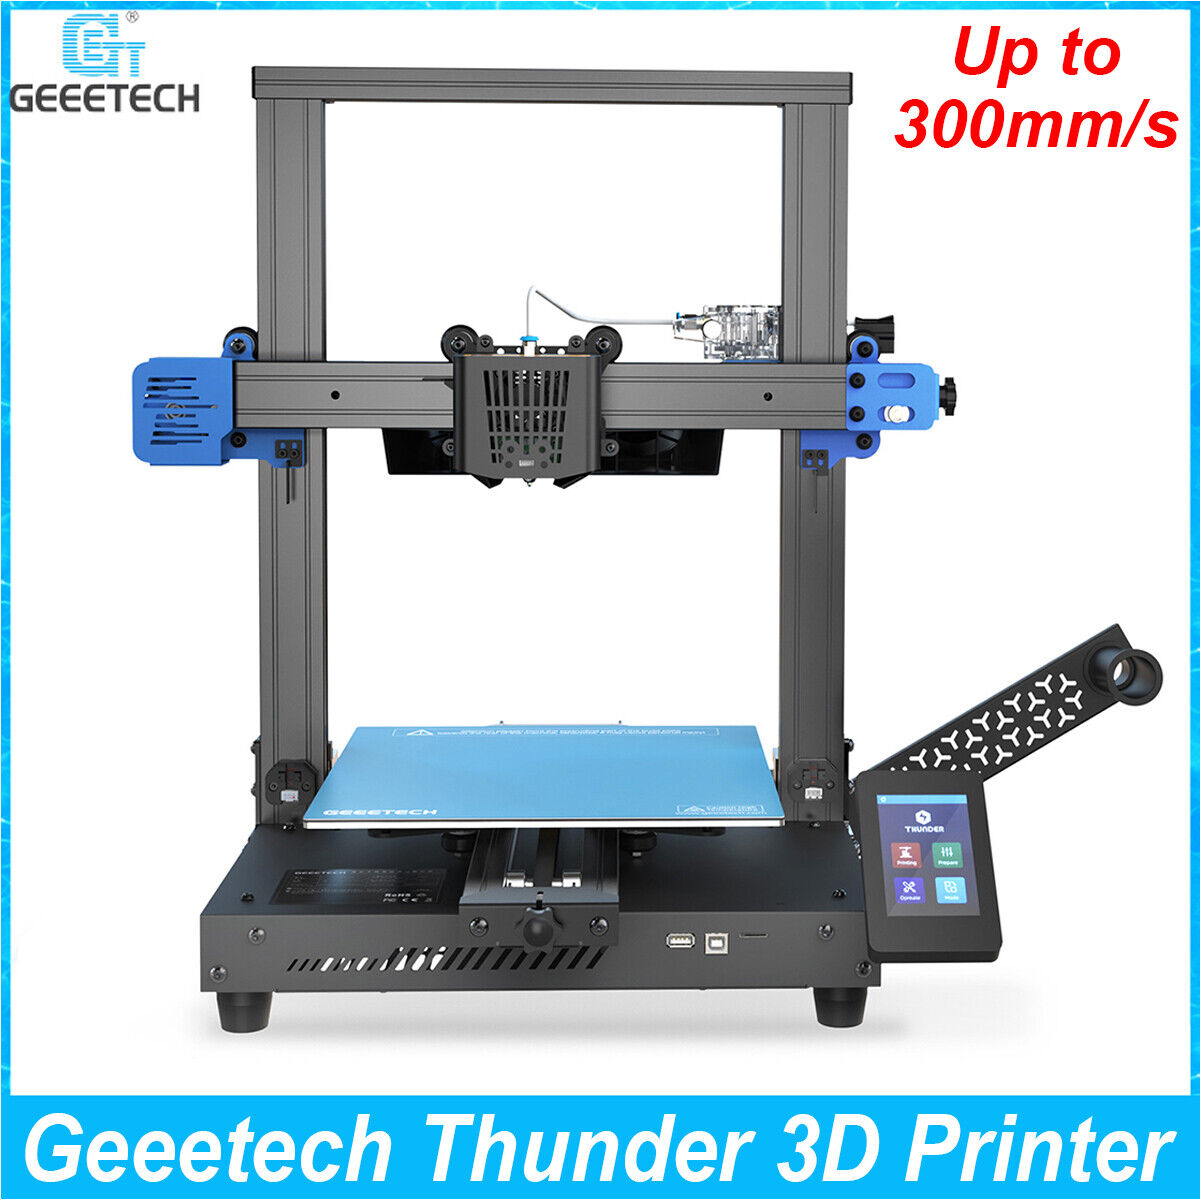 Geeetech Thunder 3D Printer 300mm/s High Speed Fast Printing w/ Auto-Leveling US